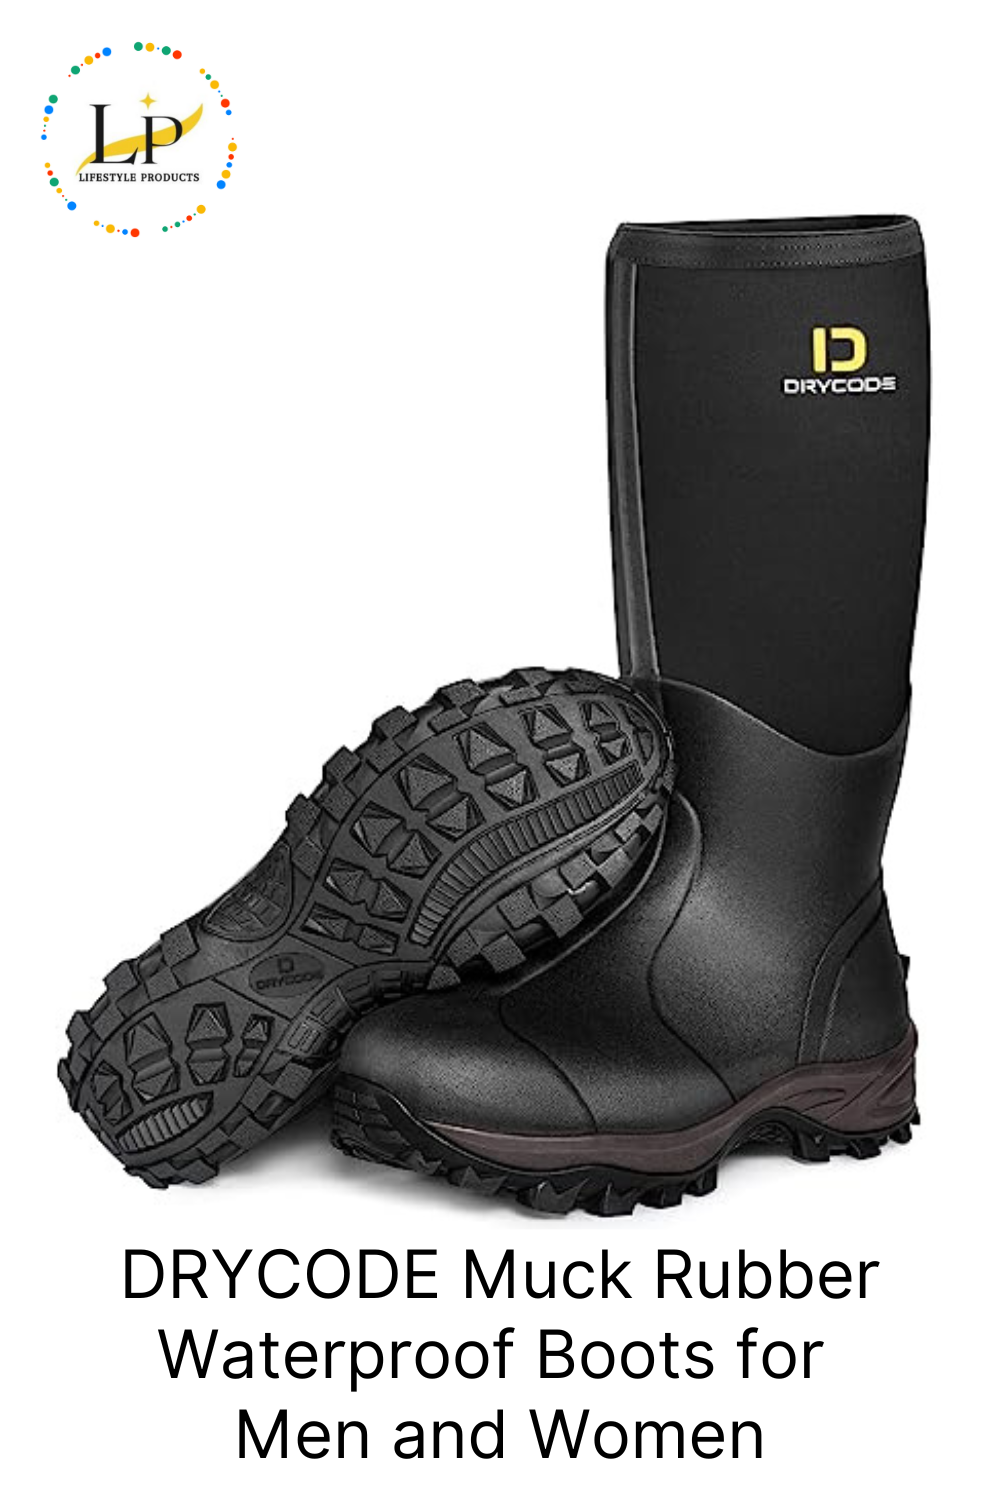 Rain Boots For Men Protect Your Feet And
  Pants From Rain